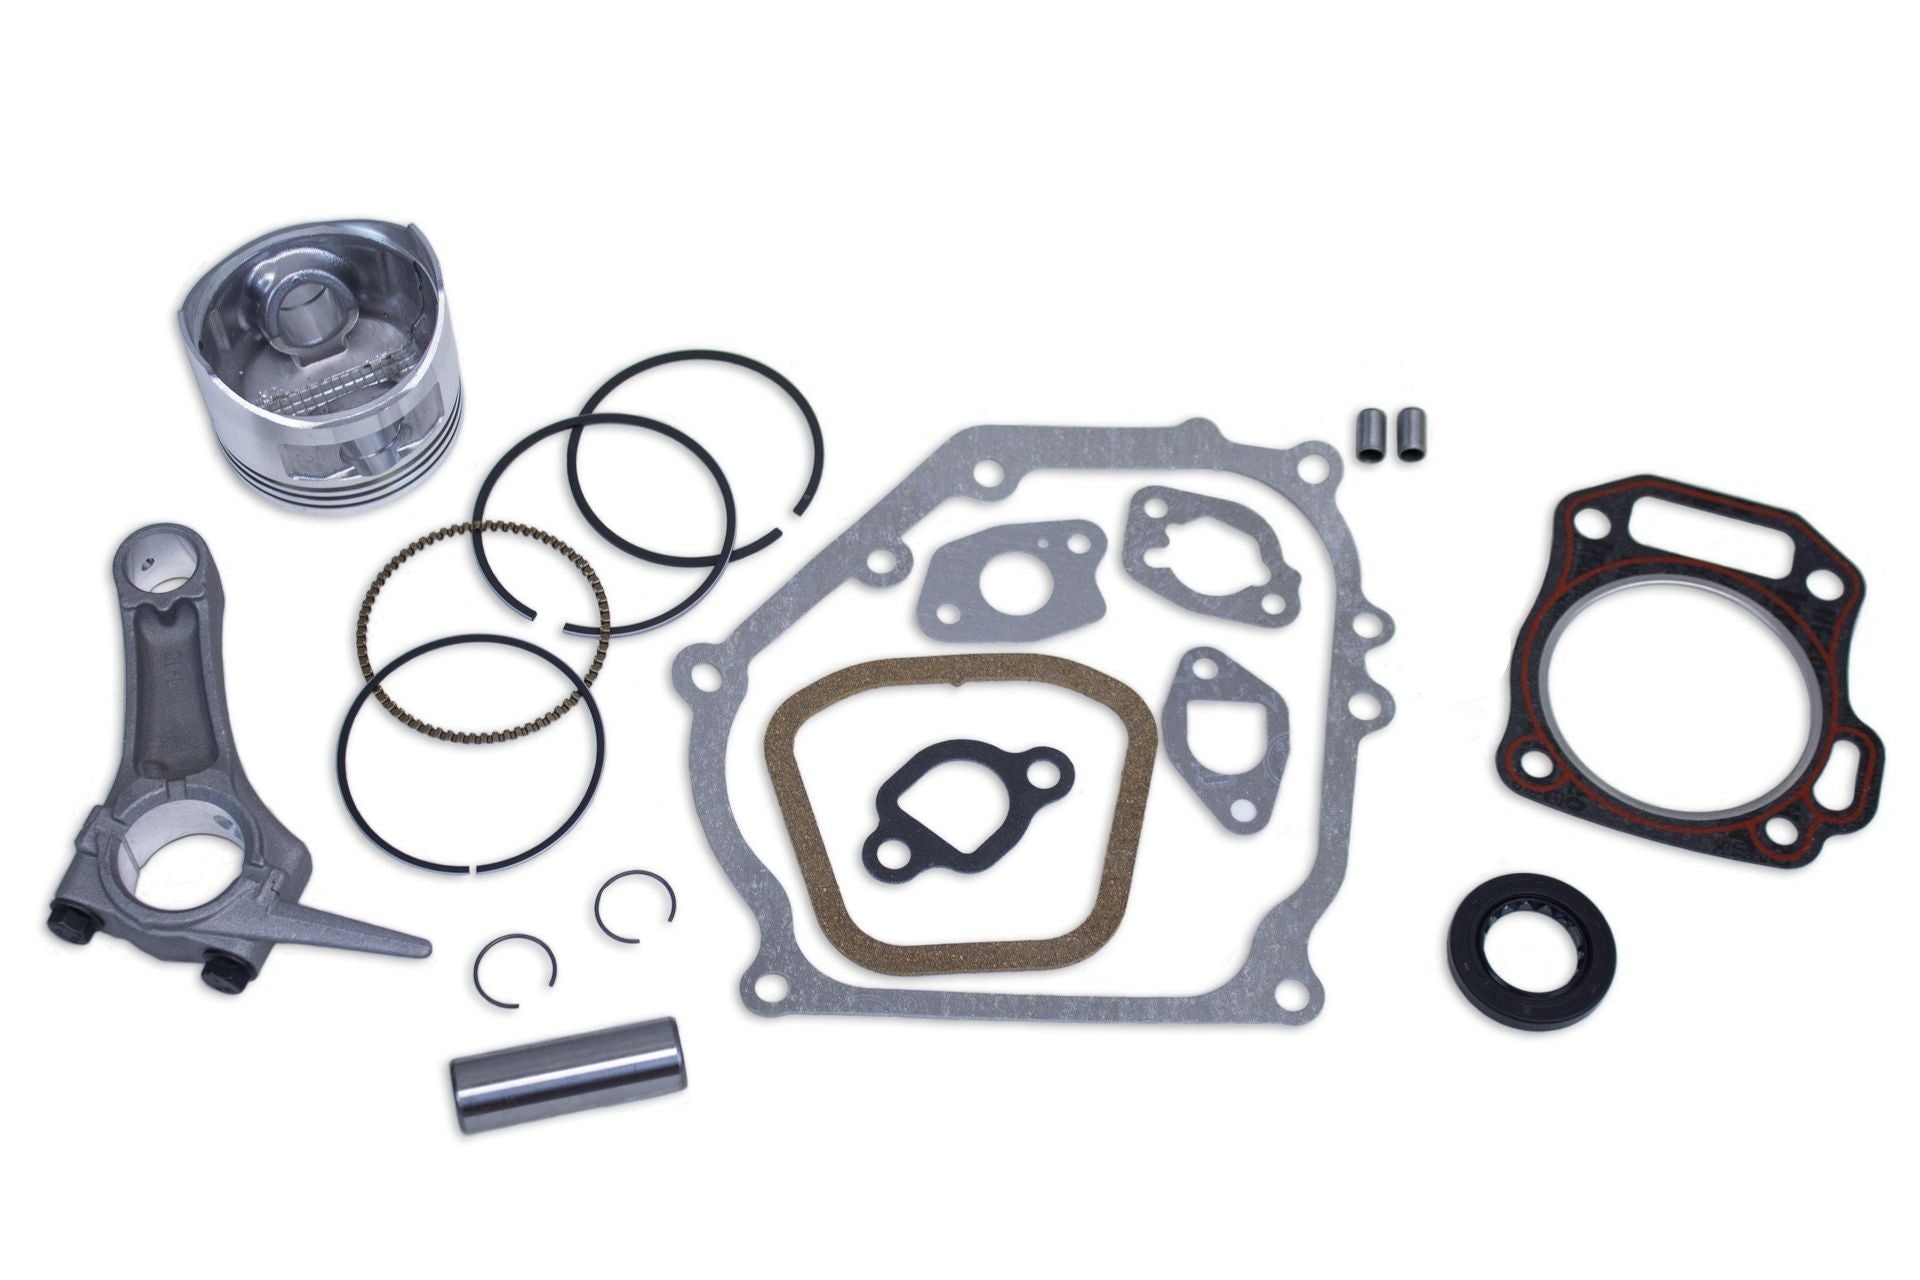 Top end rebuild kit for Honda GX160 5.5HP with piston kit, connecting rod, gasket kit and low oil sensor